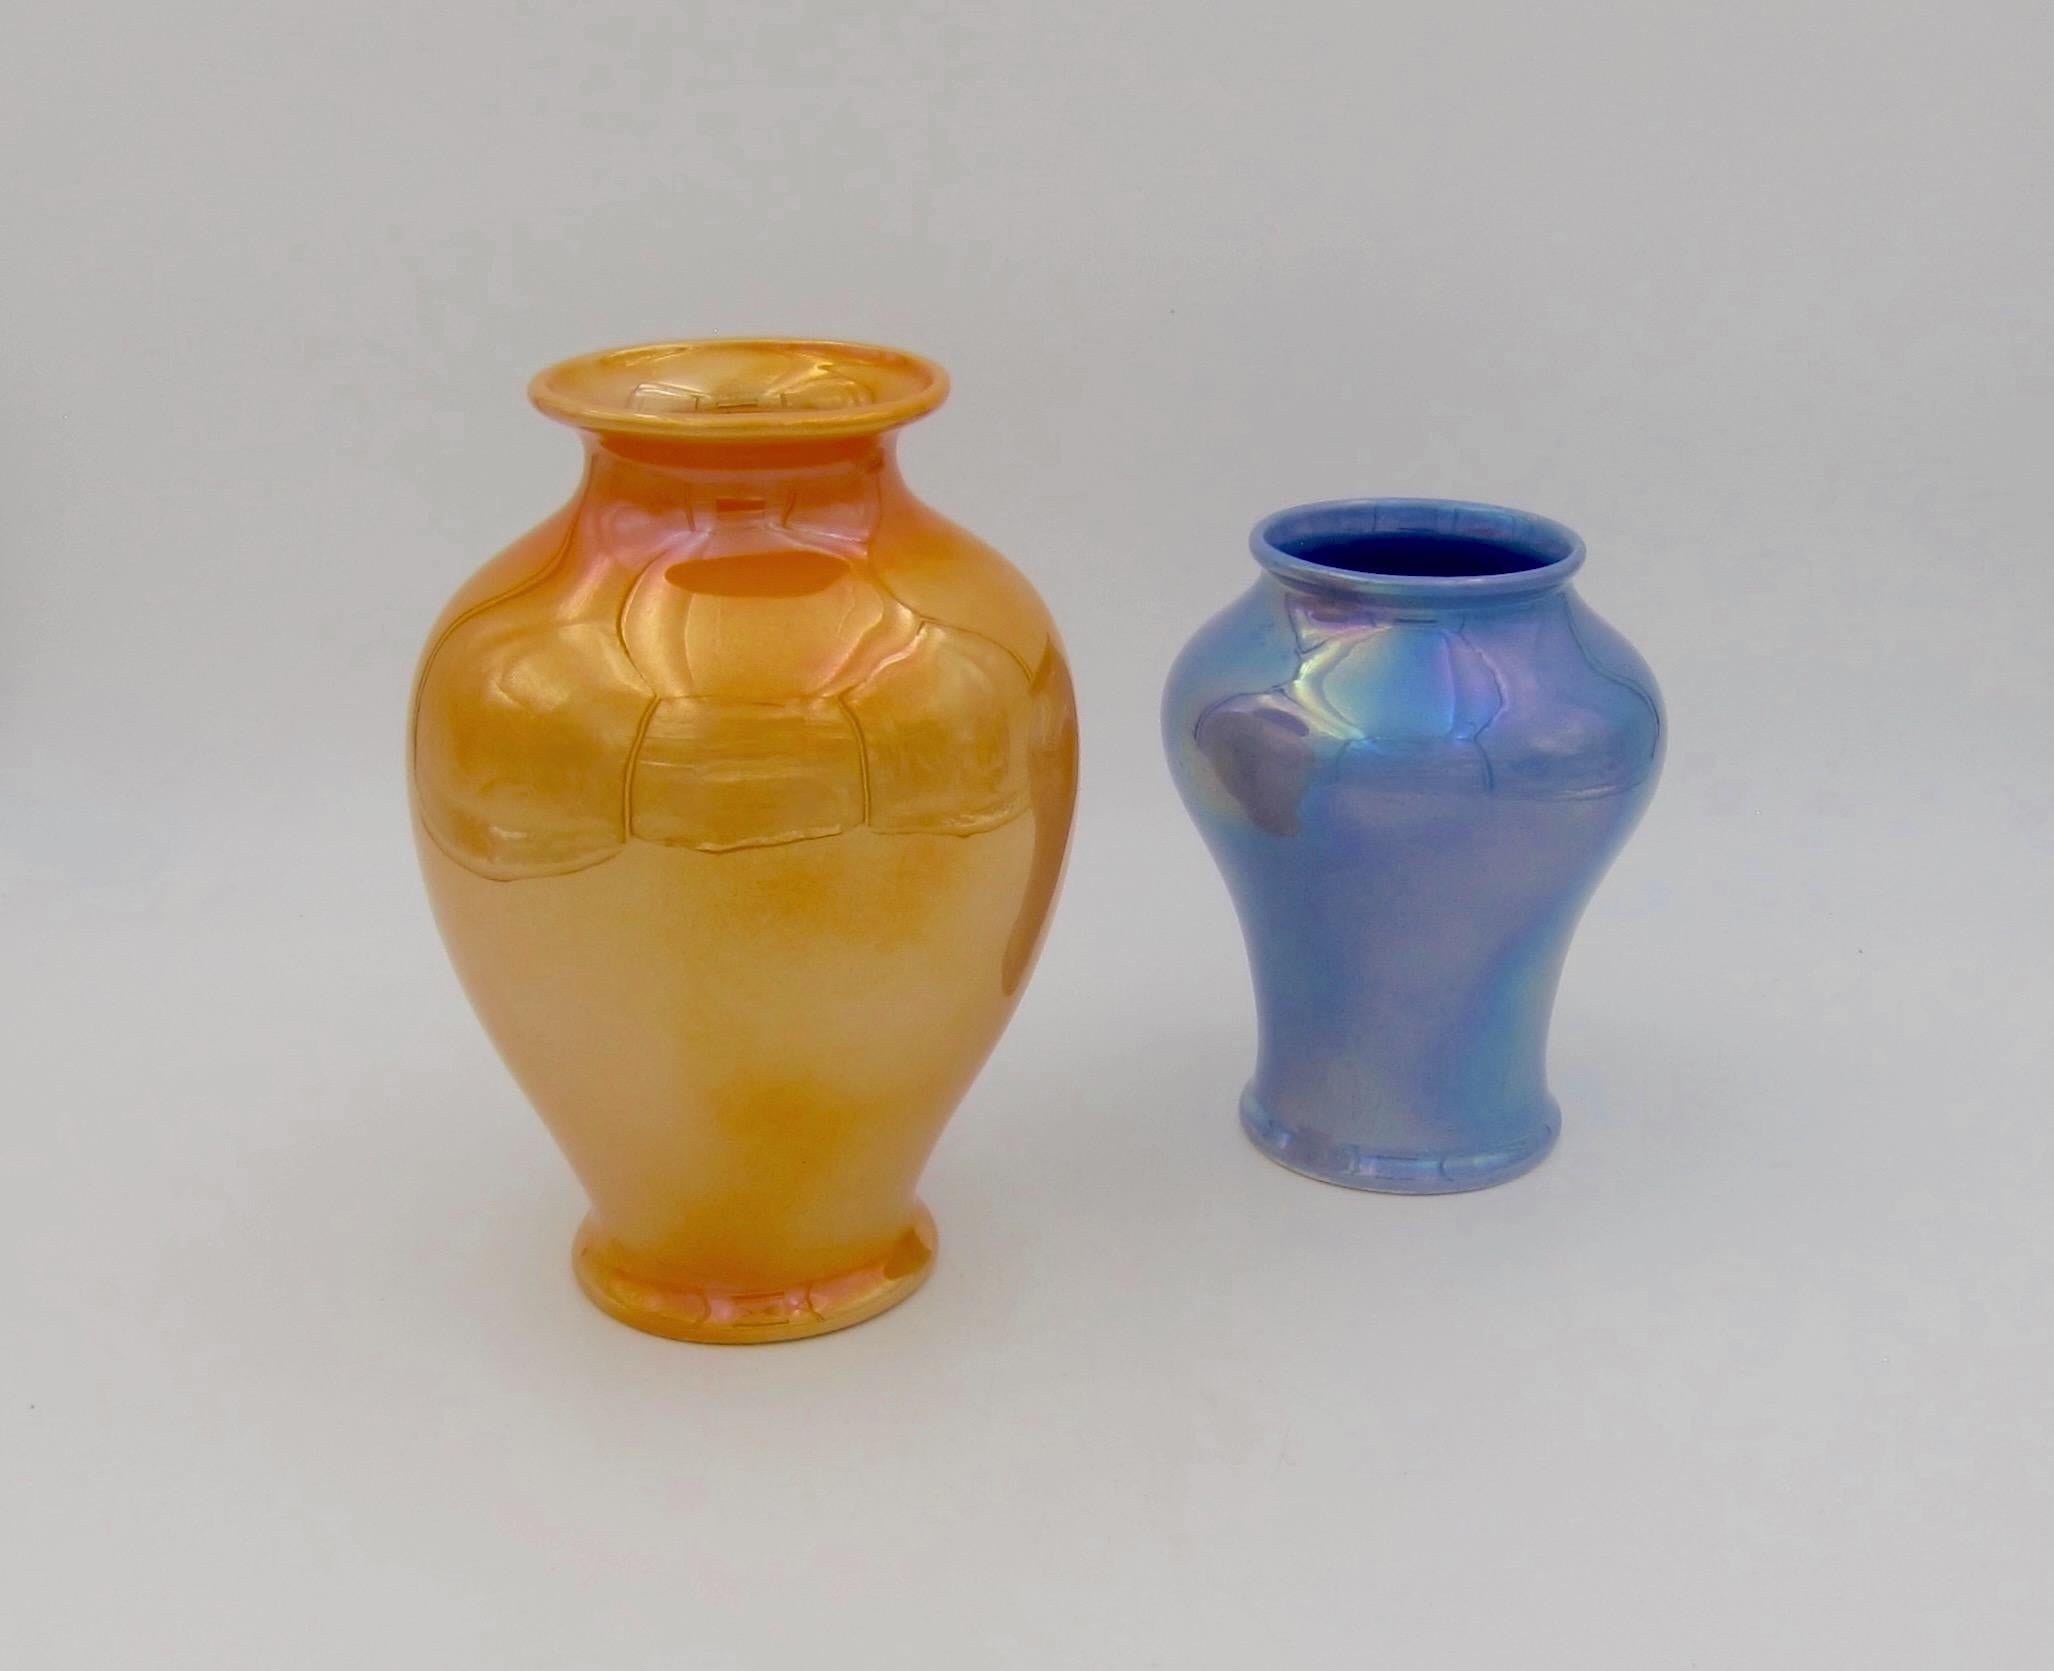 Two American art pottery vases with Marigold and Larkspur reflective luster glazes from Cowan Pottery Studio, dating 1922-1927. Both vases were slip cast and decorated with Cowan's breakthrough development of an iridescent metallic glaze process